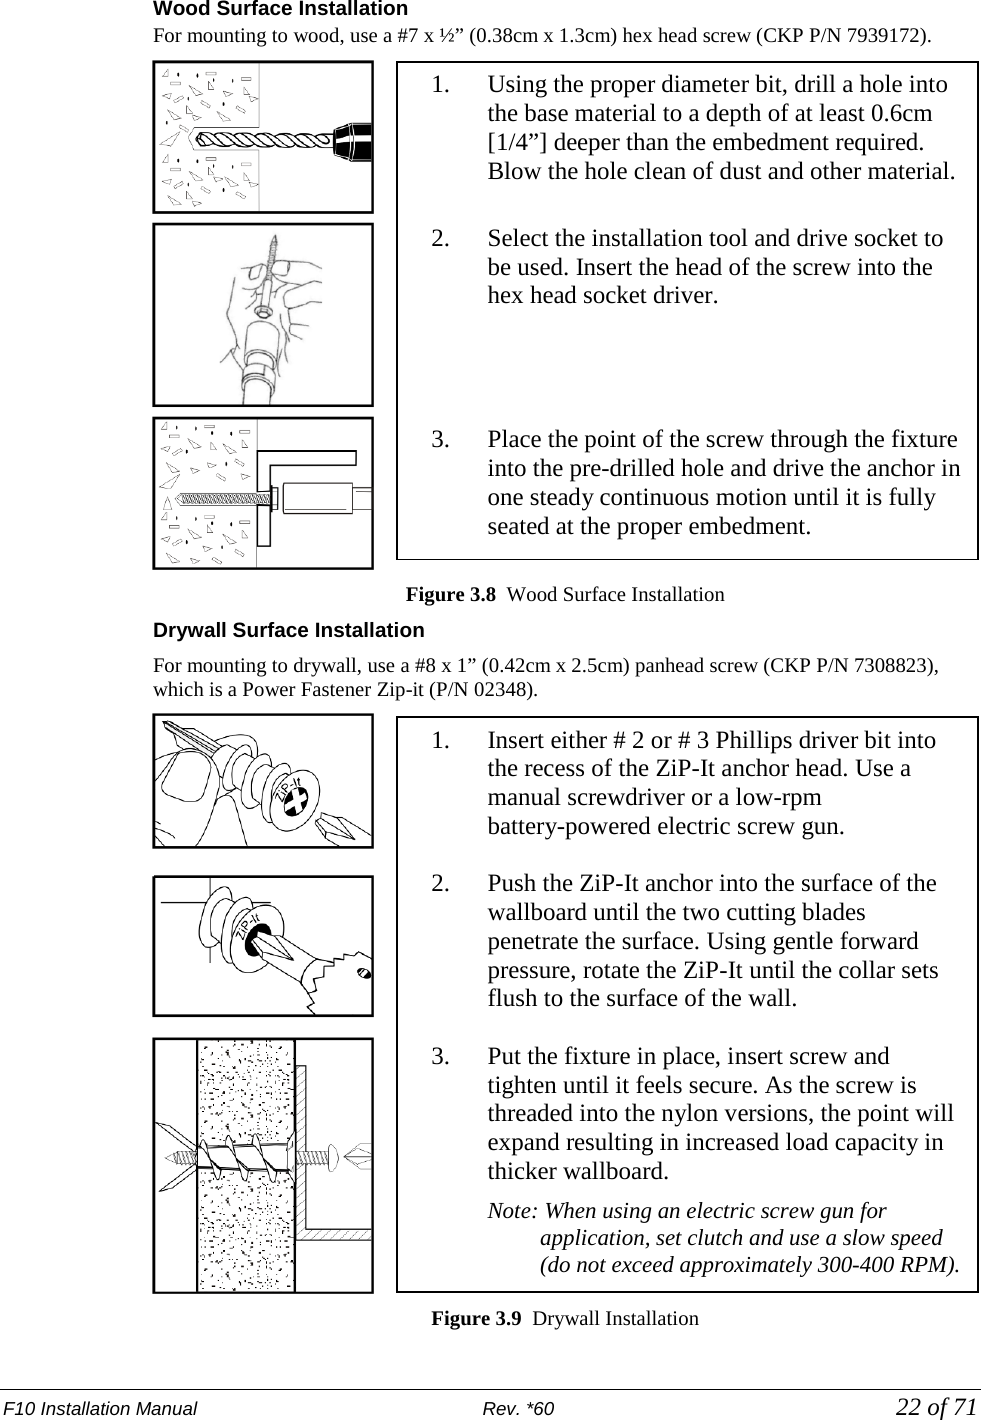 F10 Installation Manual                          Rev. *60            22 of 71 Wood Surface Installation For mounting to wood, use a #7 x ½” (0.38cm x 1.3cm) hex head screw (CKP P/N 7939172).   Figure 3.8  Wood Surface Installation   Drywall Surface Installation For mounting to drywall, use a #8 x 1” (0.42cm x 2.5cm) panhead screw (CKP P/N 7308823), which is a Power Fastener Zip-it (P/N 02348).   Figure 3.9  Drywall Installation 1. Using the proper diameter bit, drill a hole into the base material to a depth of at least 0.6cm [1/4”] deeper than the embedment required. Blow the hole clean of dust and other material.  2. Select the installation tool and drive socket to be used. Insert the head of the screw into the hex head socket driver.      3. Place the point of the screw through the fixture into the pre-drilled hole and drive the anchor in one steady continuous motion until it is fully seated at the proper embedment.  1. Insert either # 2 or # 3 Phillips driver bit into the recess of the ZiP-It anchor head. Use a manual screwdriver or a low-rpm battery-powered electric screw gun.  2. Push the ZiP-It anchor into the surface of the wallboard until the two cutting blades penetrate the surface. Using gentle forward pressure, rotate the ZiP-It until the collar sets flush to the surface of the wall.  3. Put the fixture in place, insert screw and tighten until it feels secure. As the screw is threaded into the nylon versions, the point will expand resulting in increased load capacity in thicker wallboard.  Note: When using an electric screw gun for application, set clutch and use a slow speed  (do not exceed approximately 300-400 RPM). 